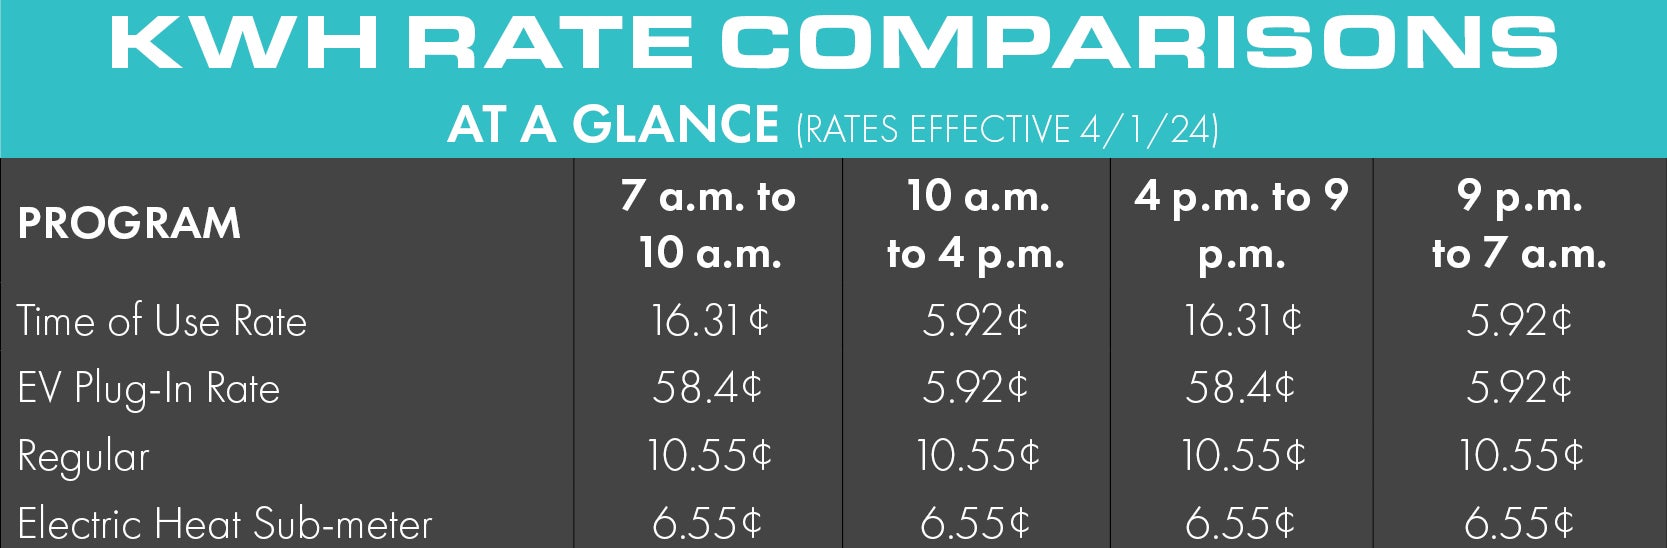 KWH Rate Comparison Chart